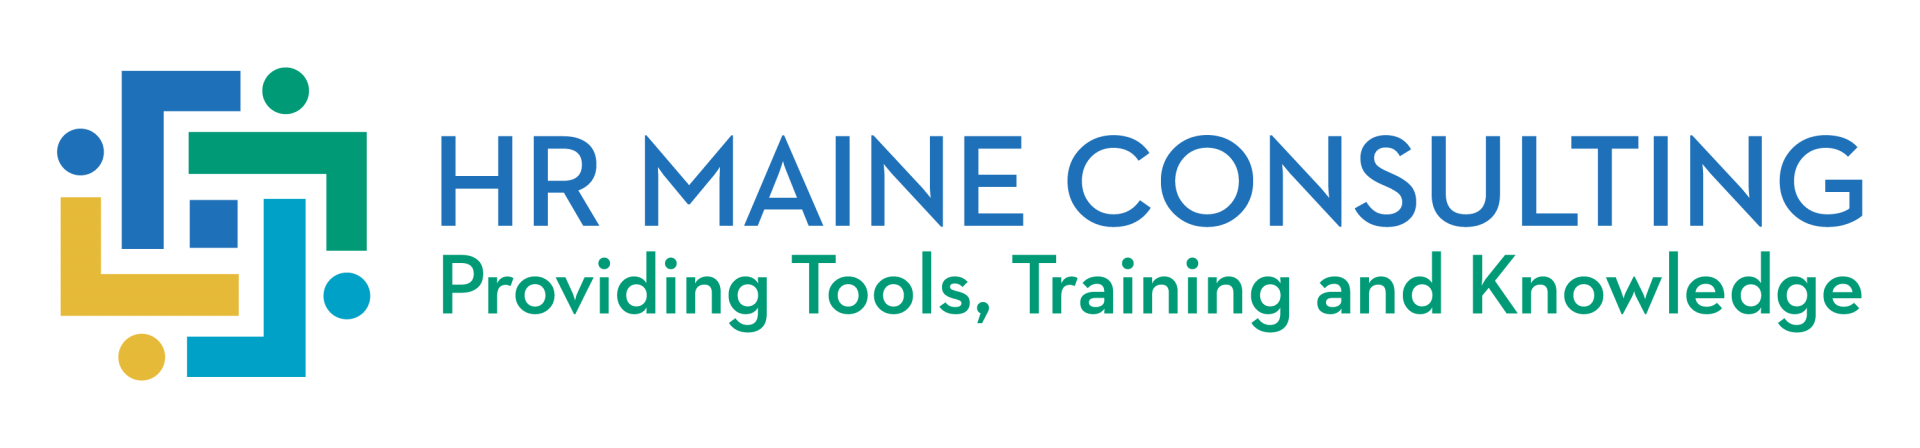 HR Maine Consulting Logo; Providing Tools, Training and Knowledge